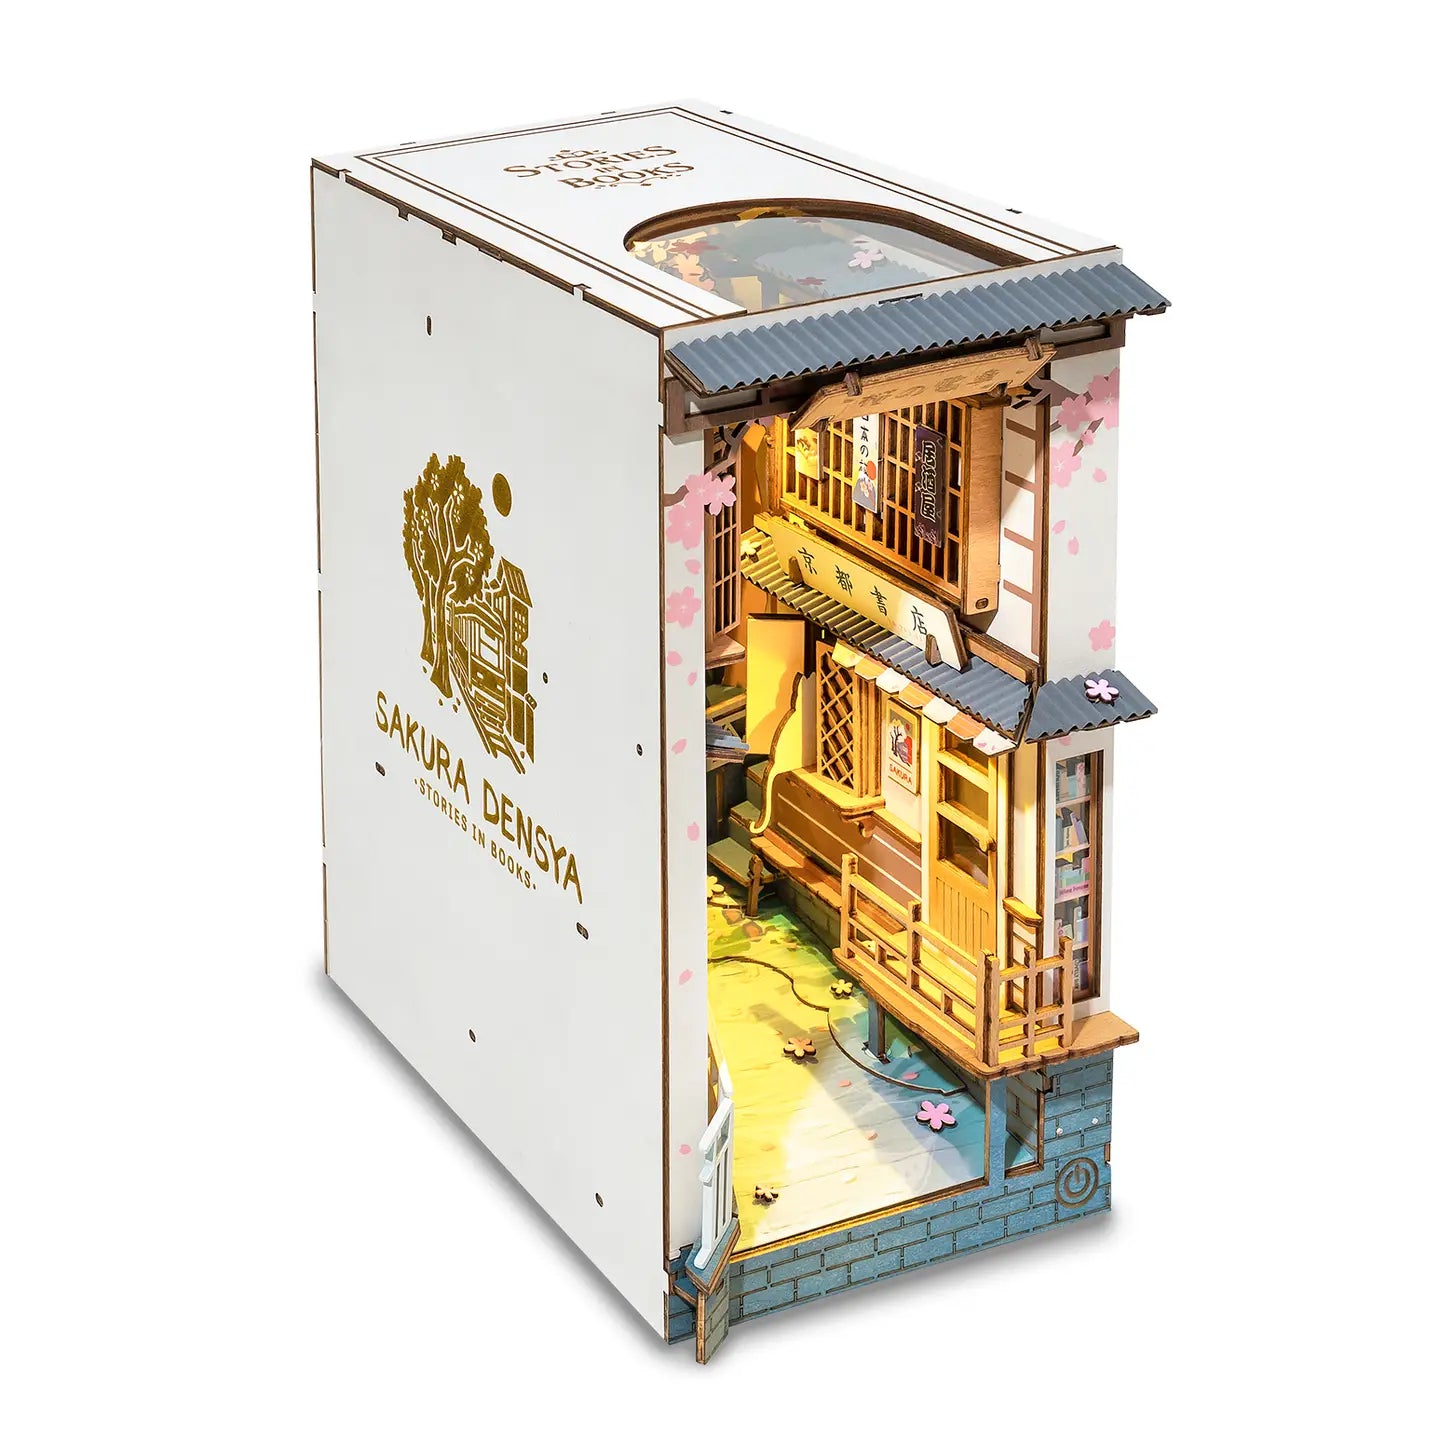 A white book nook kit featuring a Sakura Tram design, with a small house inside, wooden box, and intricate details. Dimensions: 9.4 x 3.9 x 7.4 in (23.9 x 9.9 x 18.8 cm).